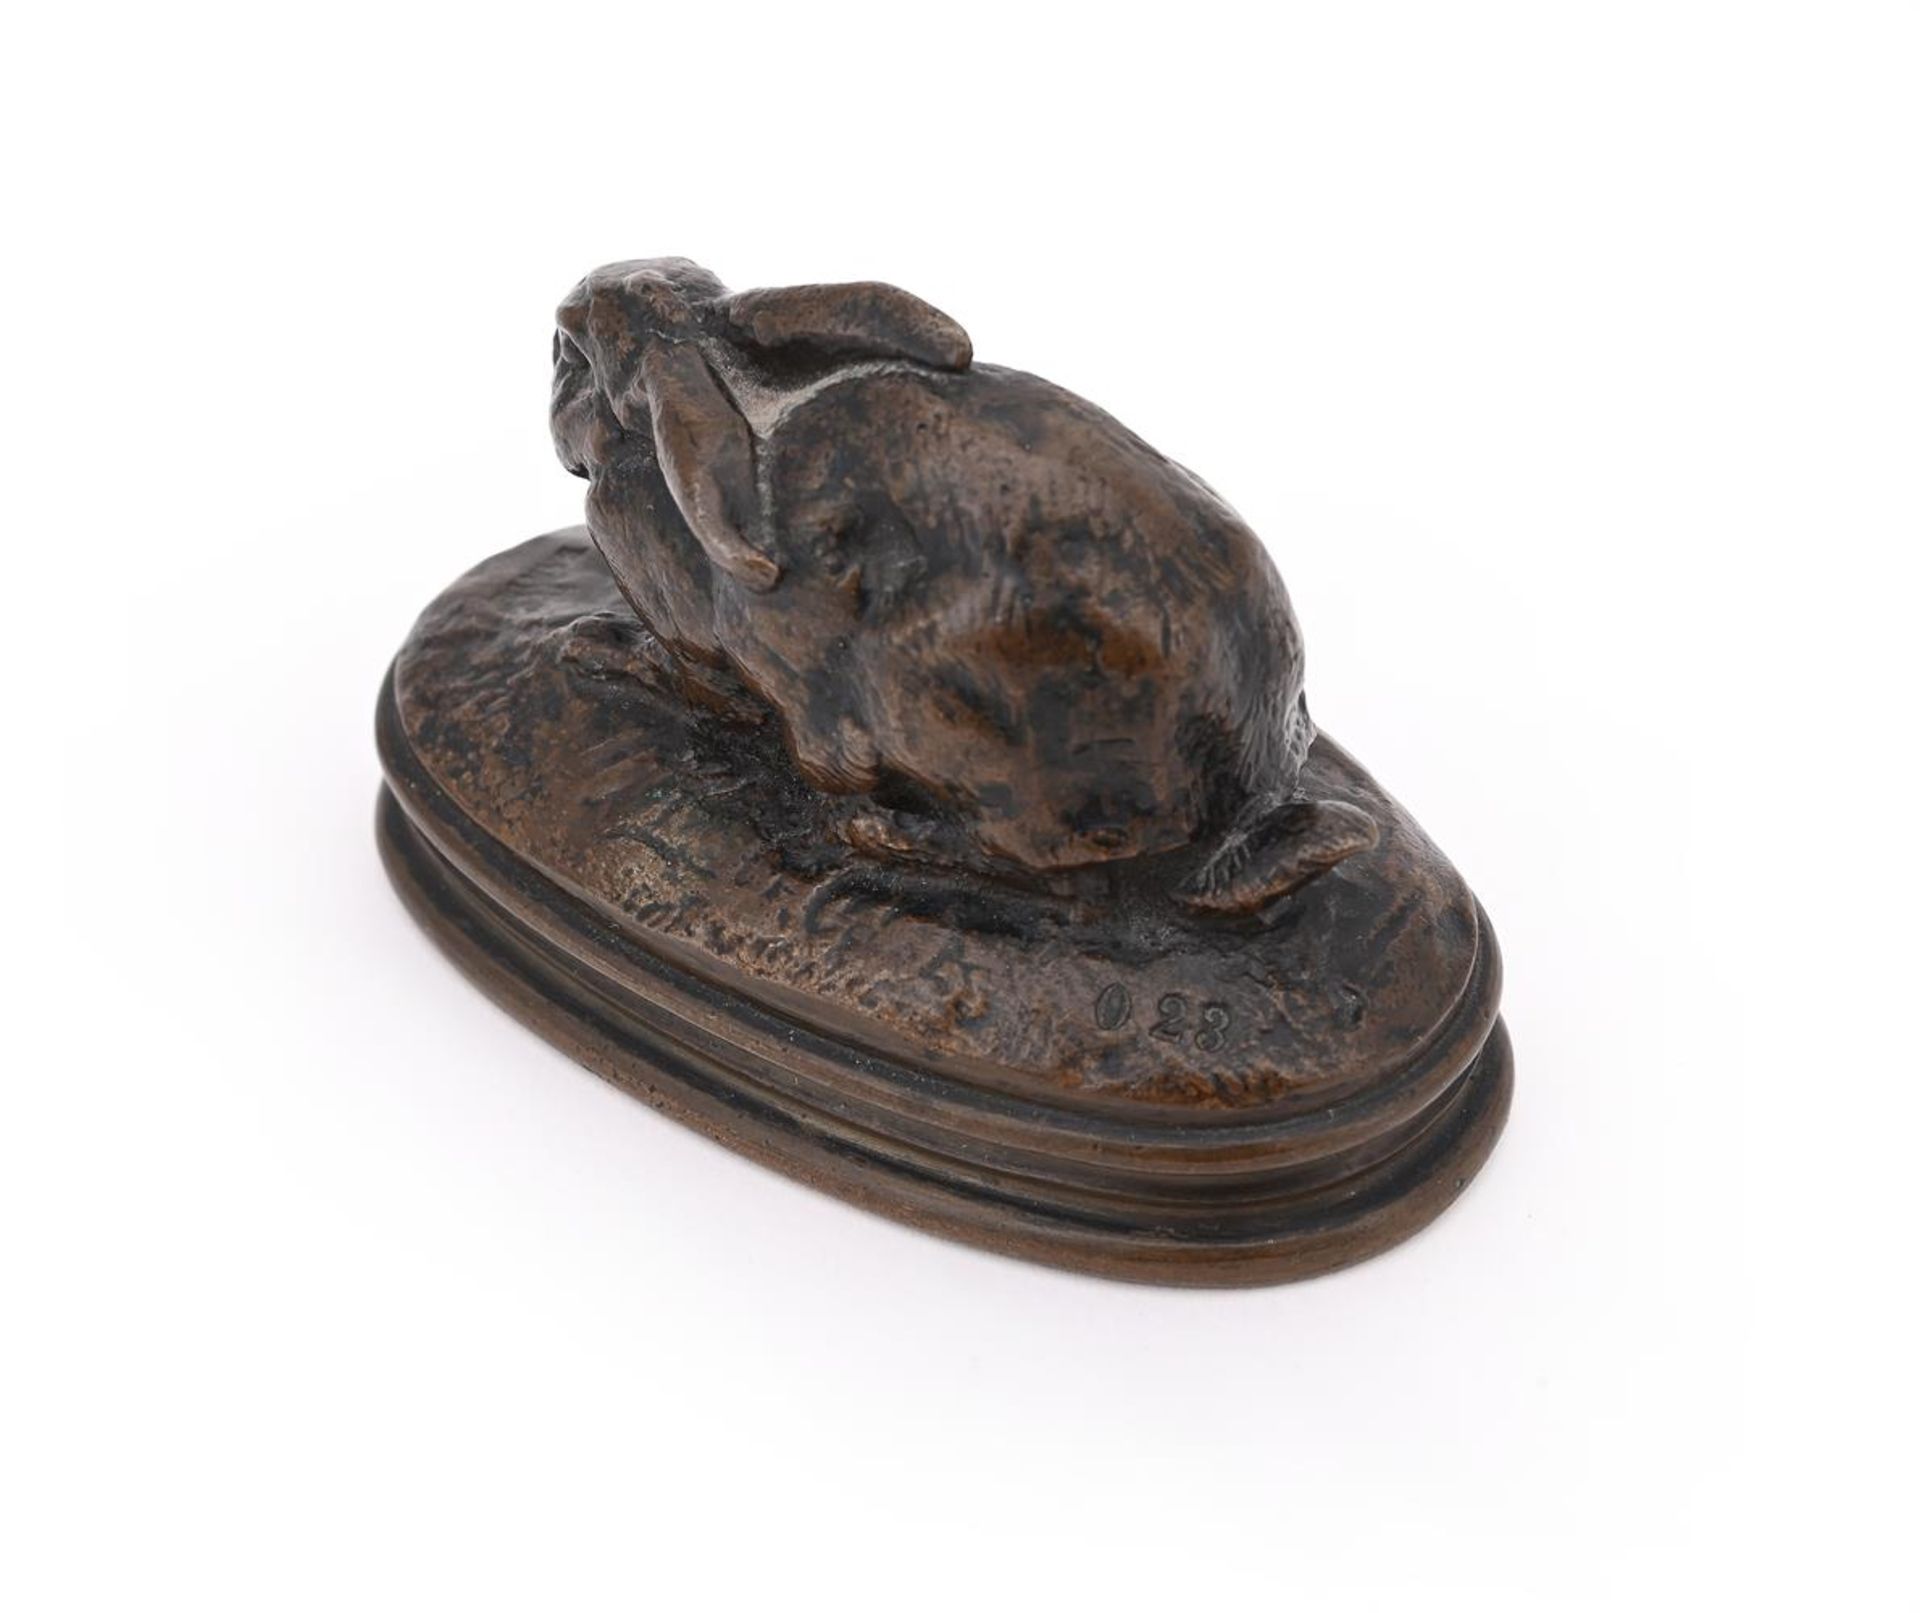 ANTOINE-LOUIS BARYE (FRENCH, 1795-1875), A BRONZE MODEL OF A CROUCHING RABBIT - Image 3 of 6